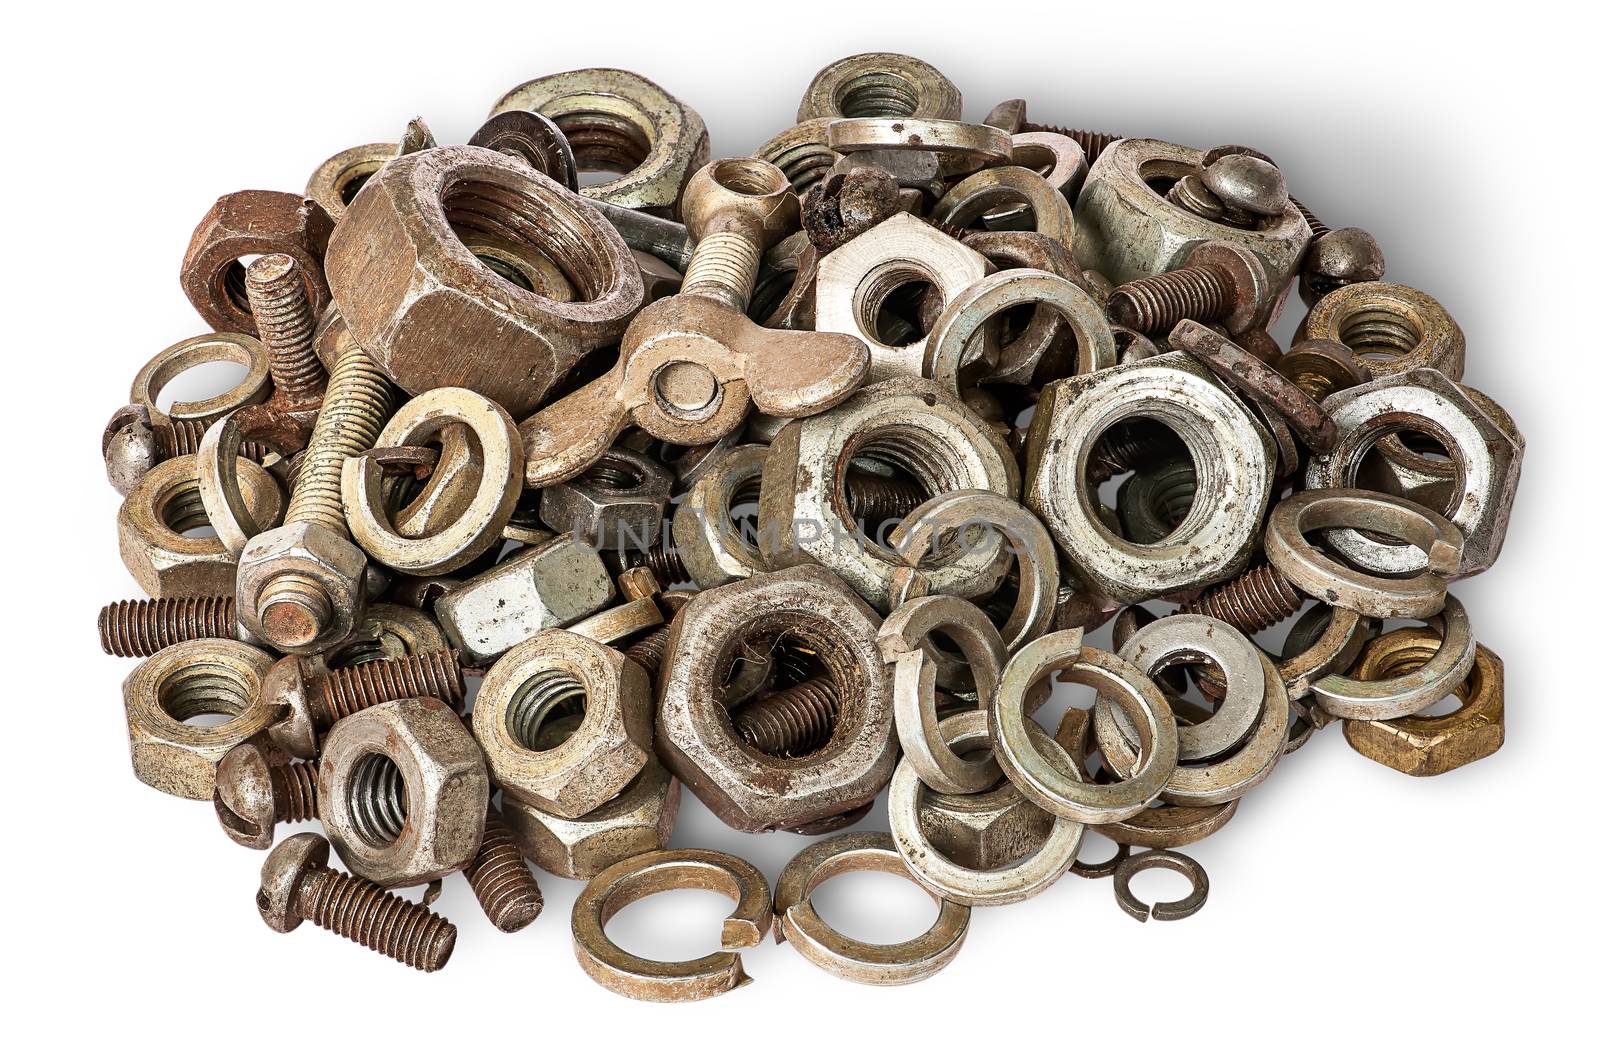 Pile of old fasteners top view by Cipariss